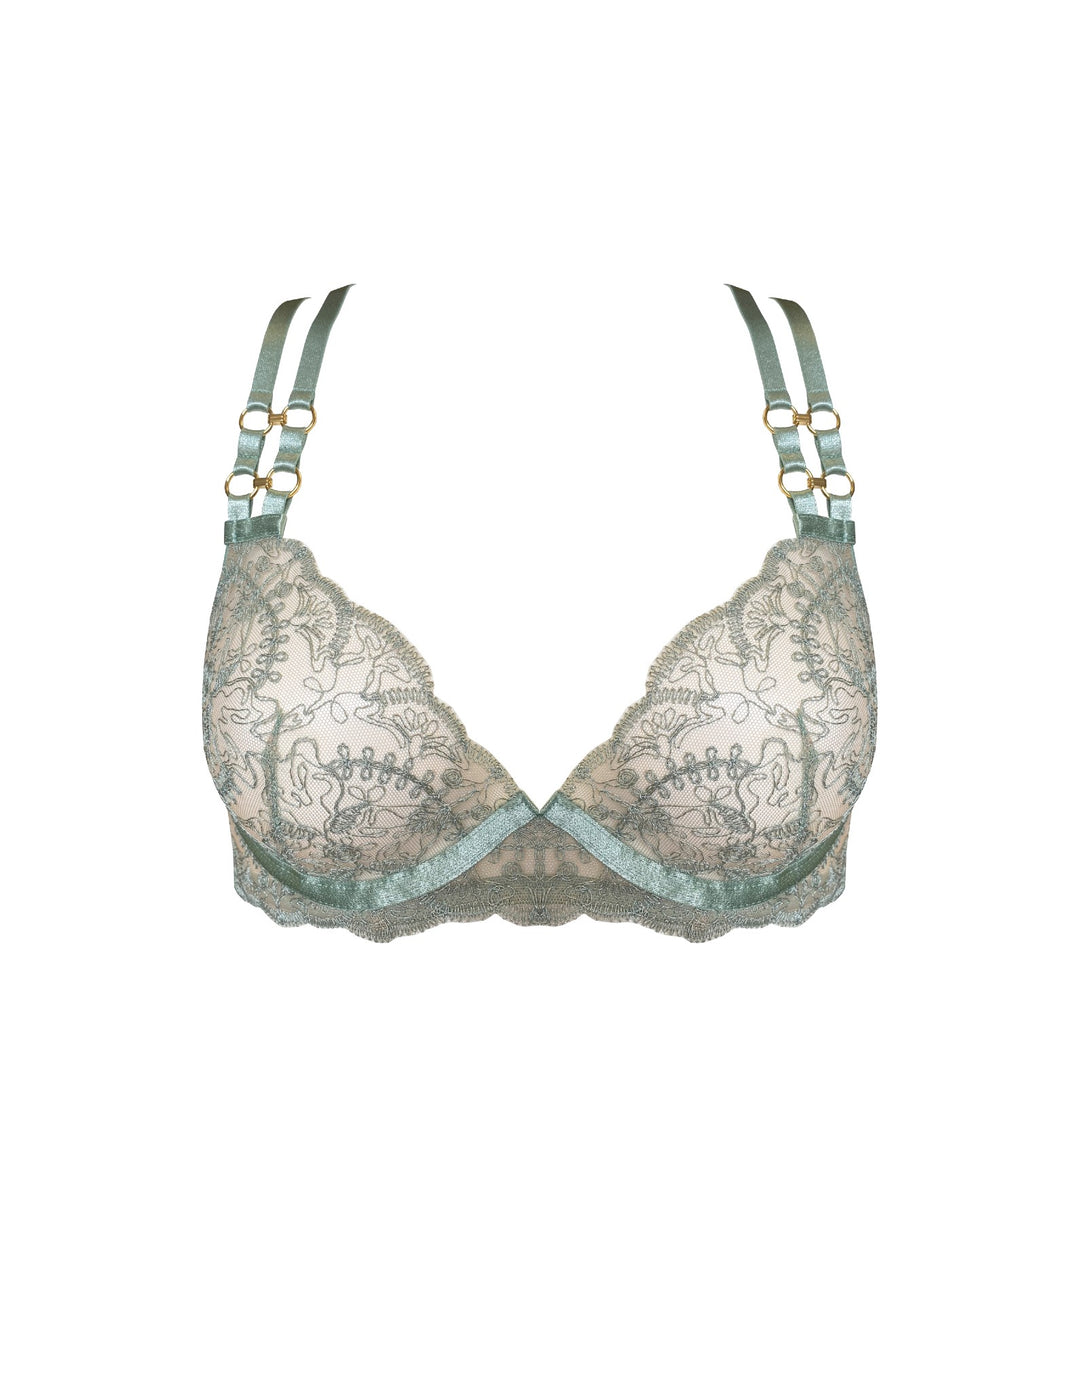 Soft unstructured no wire SATIN & lace BRA French lingerie EMERALD